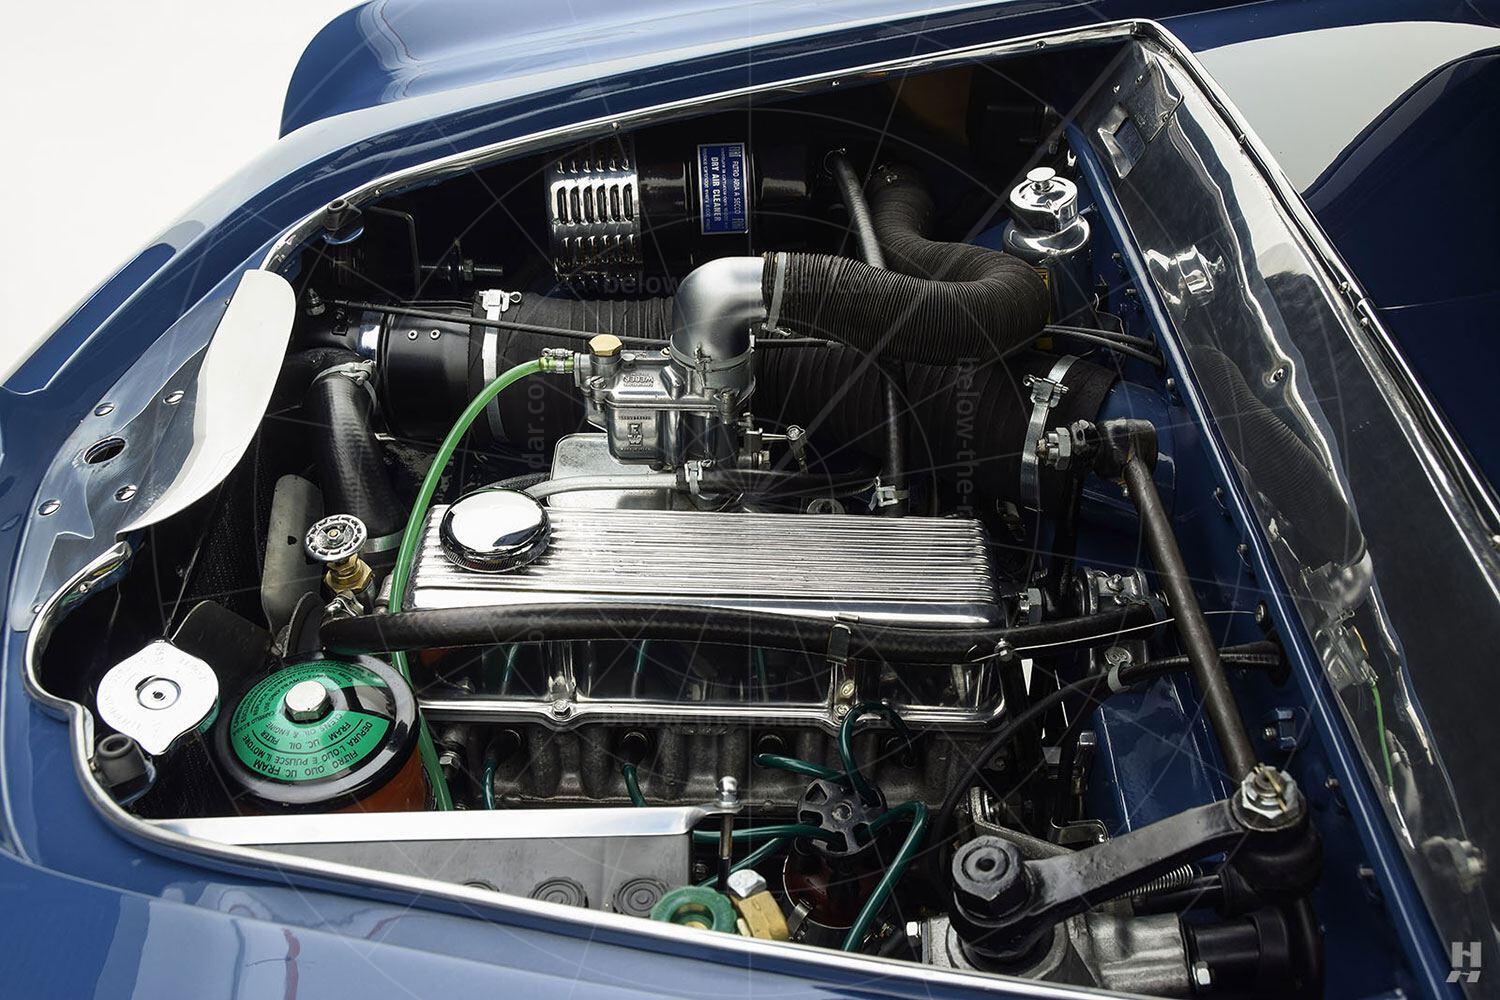 Fiat 1100 cabriolet by Allemano - engine bay Pic: Hyman Ltd | Fiat 1100 cabriolet by Allemano - engine bay